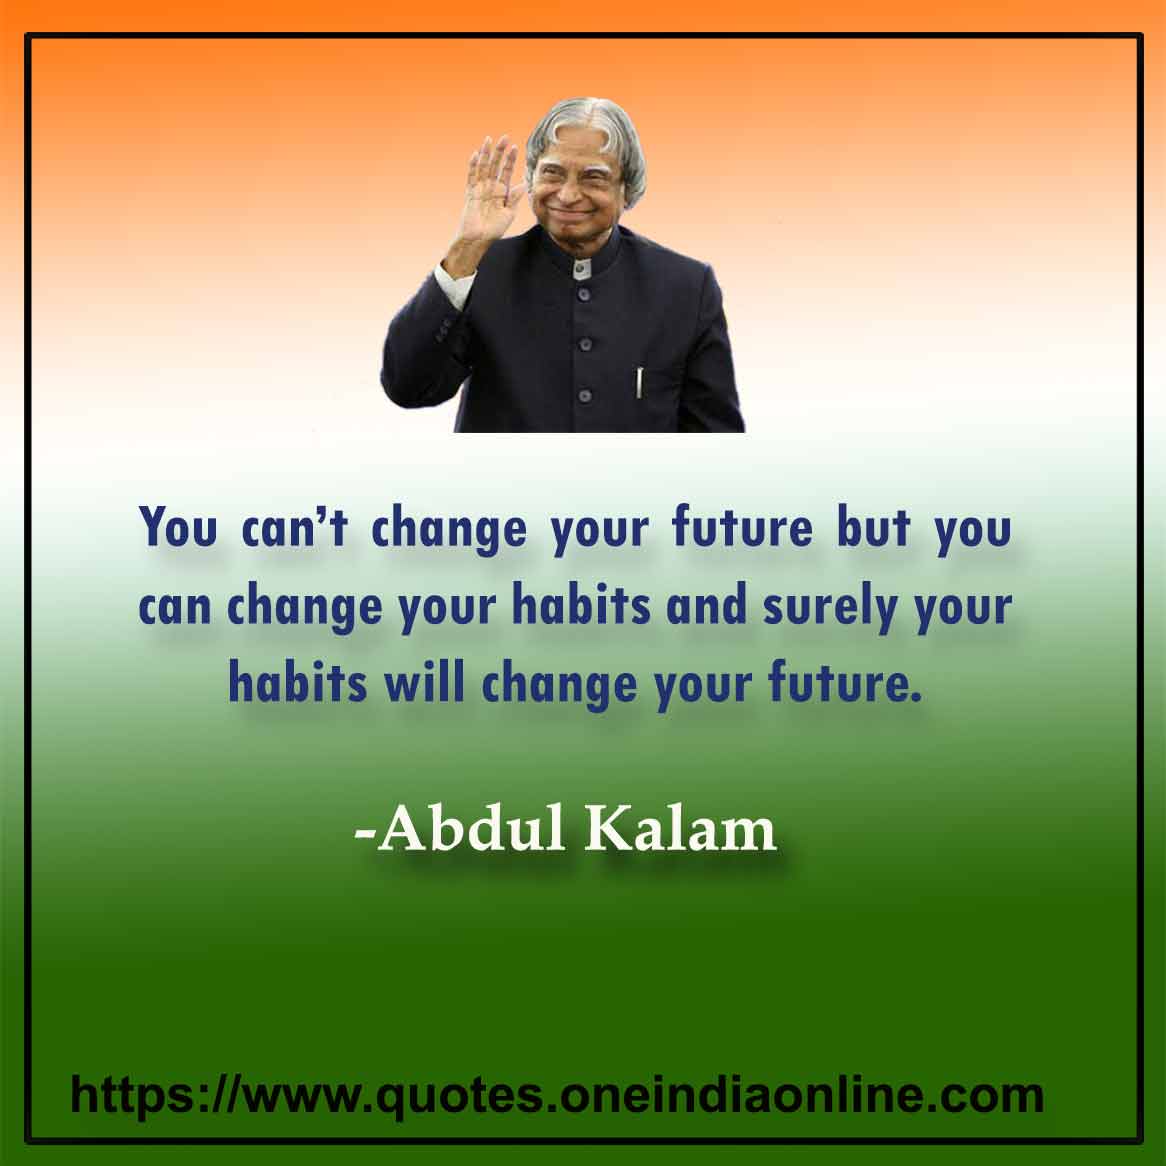 You can’t change your future but you can change your habits and surely your habits will change your future.

